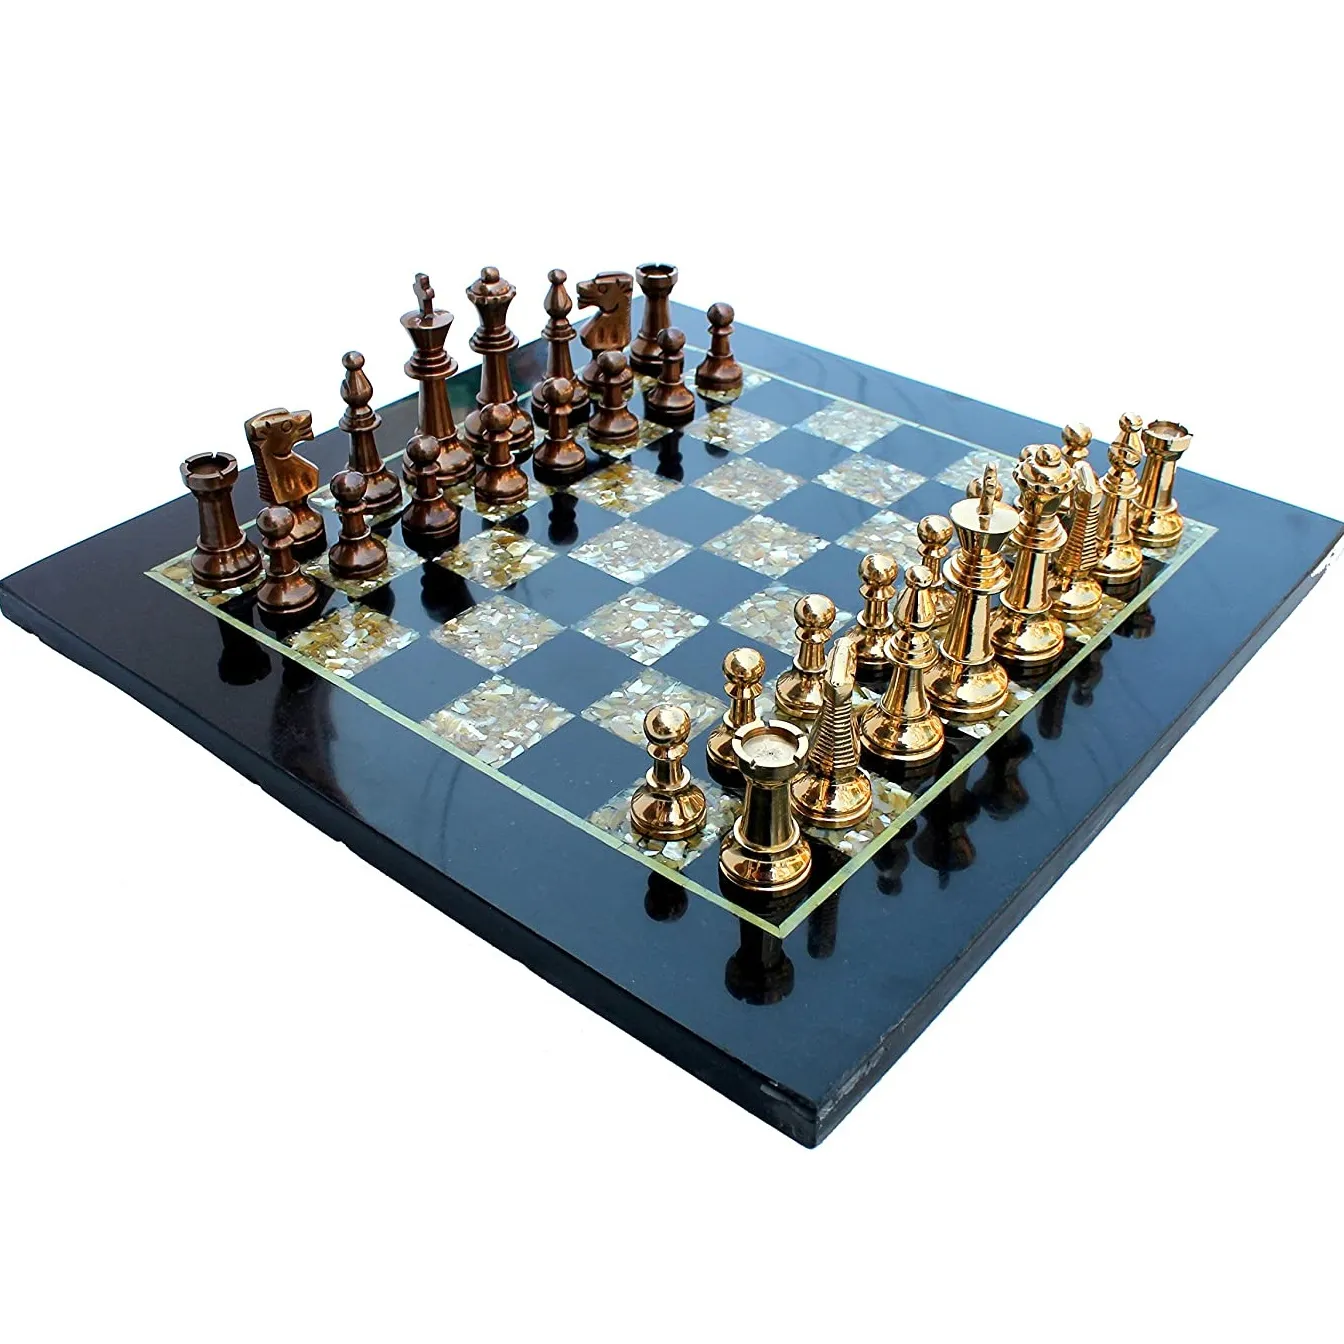 Chess Game Board Set - Made with Black Marble, Mother of Pearl & Brass Pieces (15" x 15")